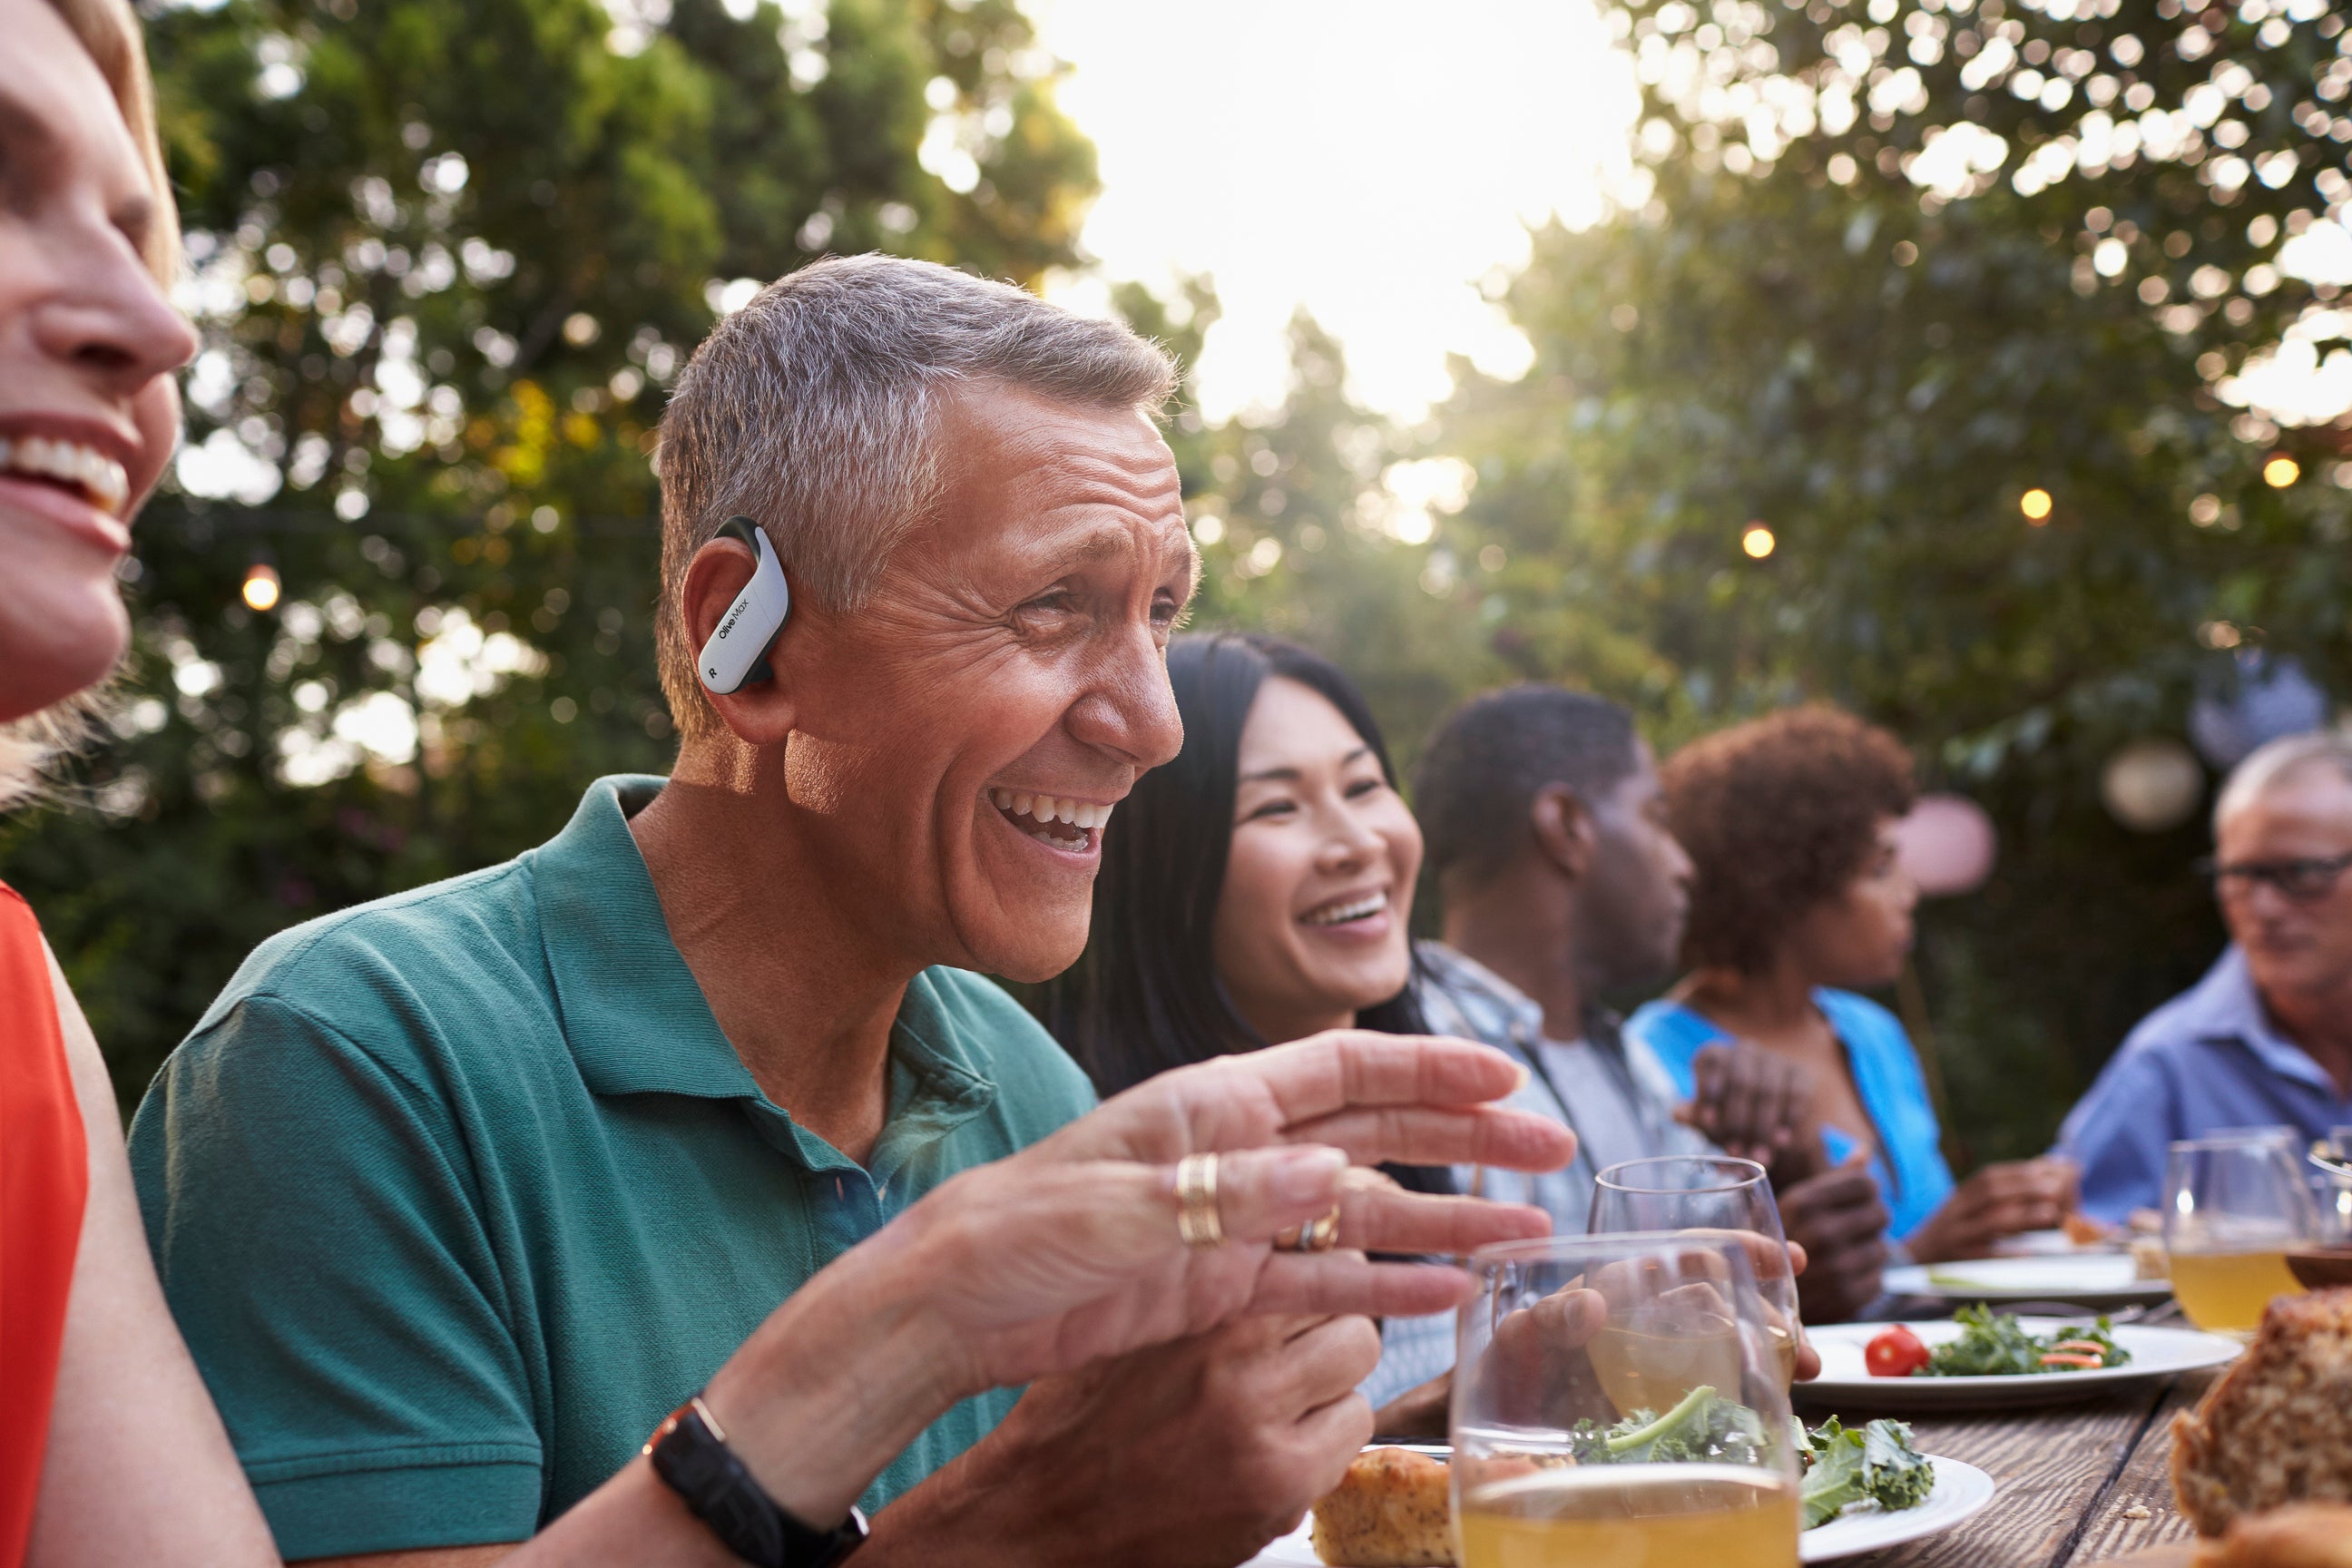 a man with hearing aid is smiling during having a meal